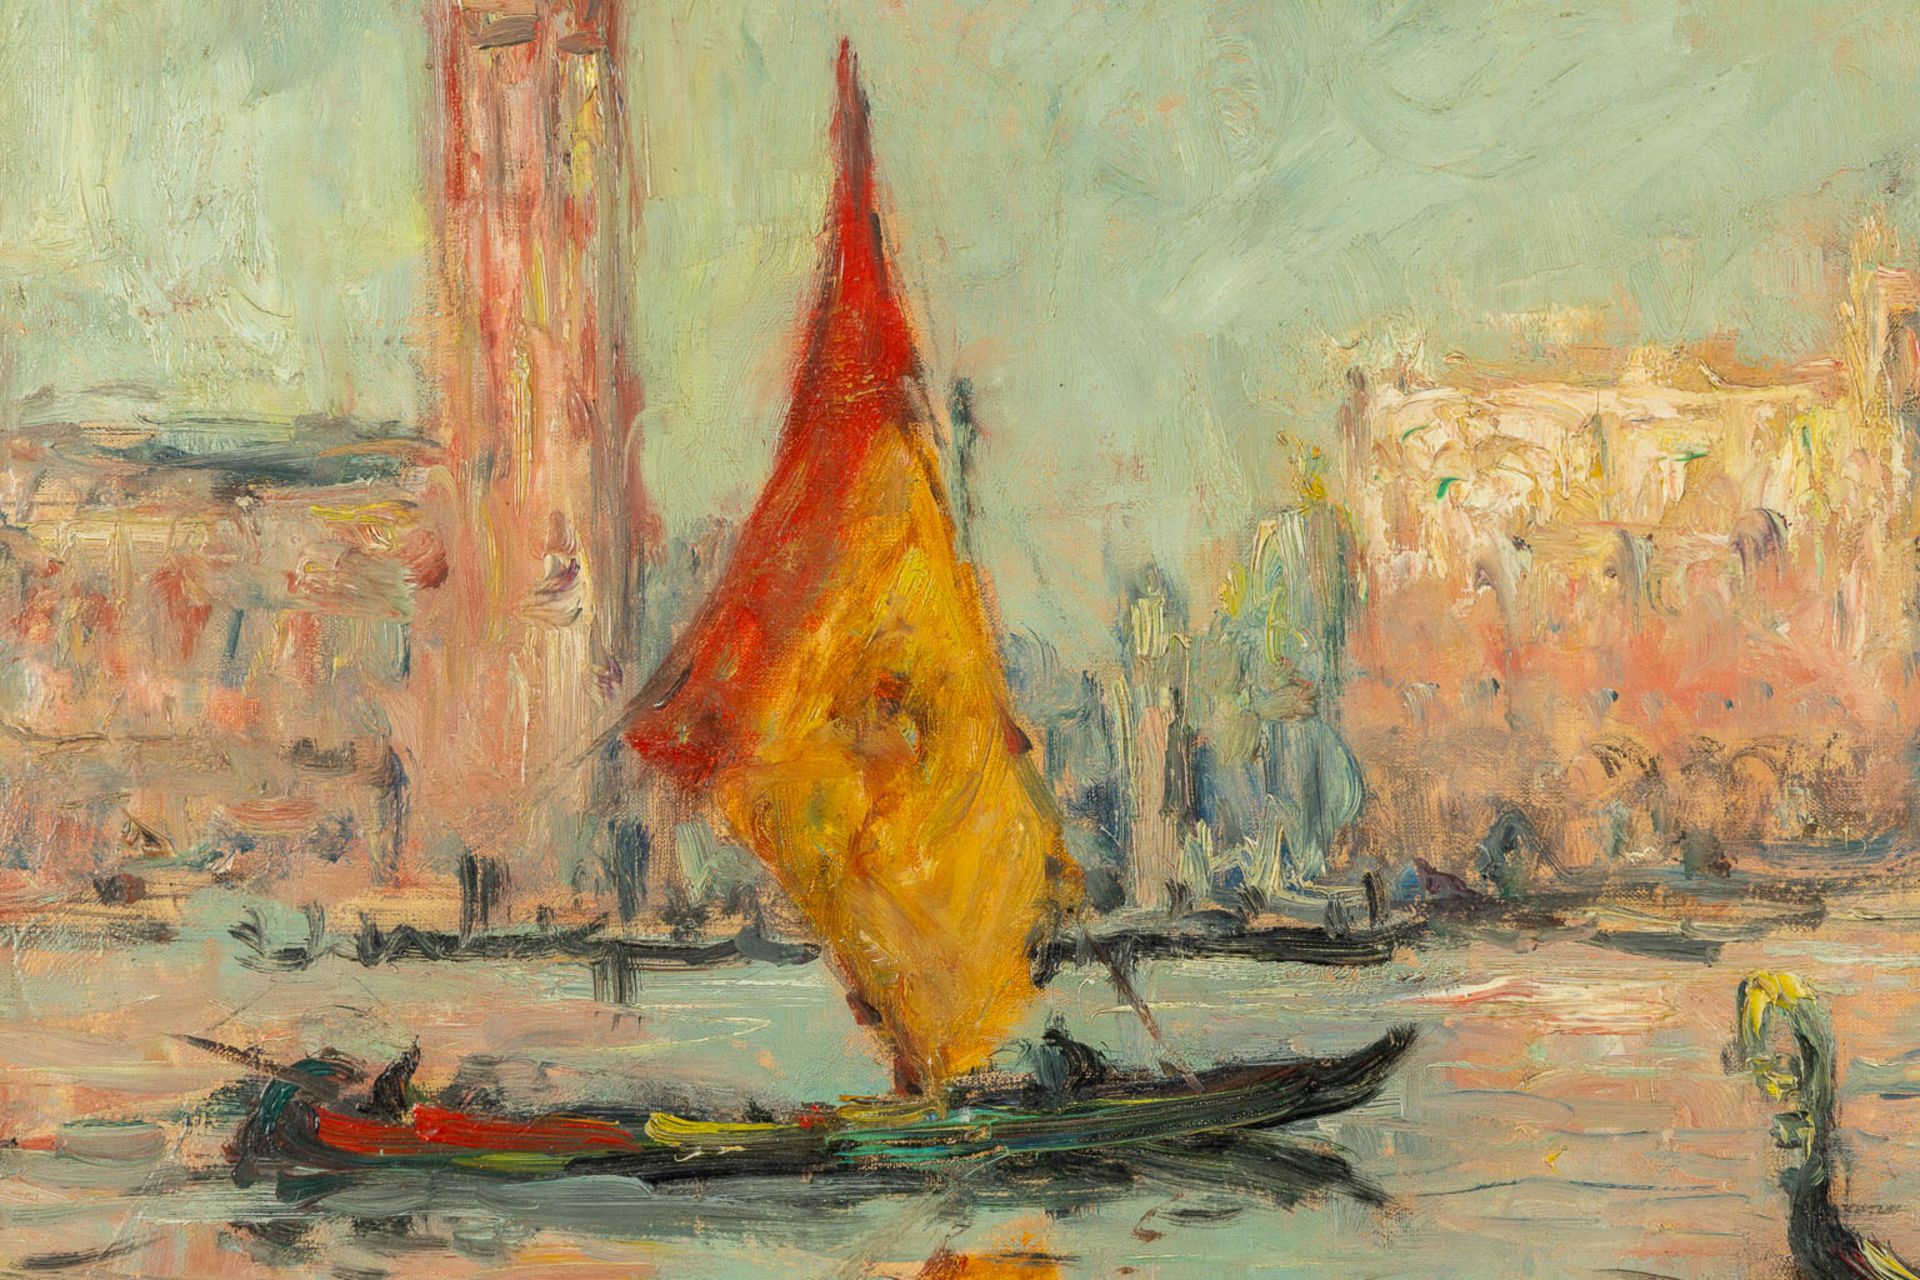 Armand JAMAR (1870-1946) 'View on Venice, Italy' 1930. (W:75 x H:55 cm) - Image 4 of 7